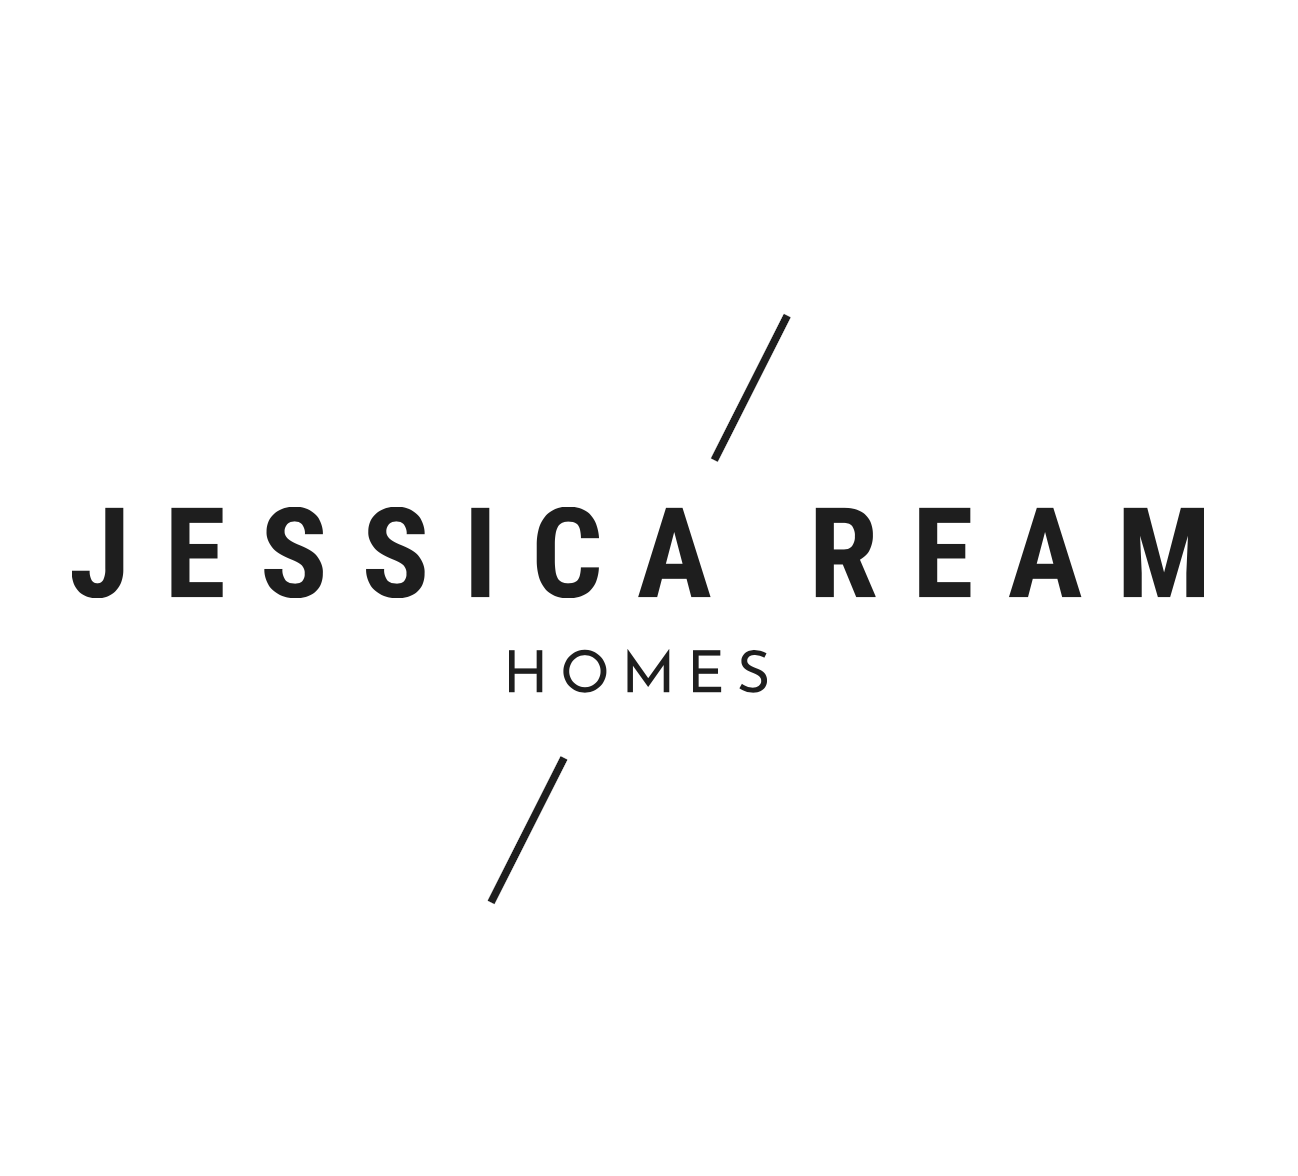 Jessica Ream Homes: Innovating the Real Estate Industry with Social Media Marketing